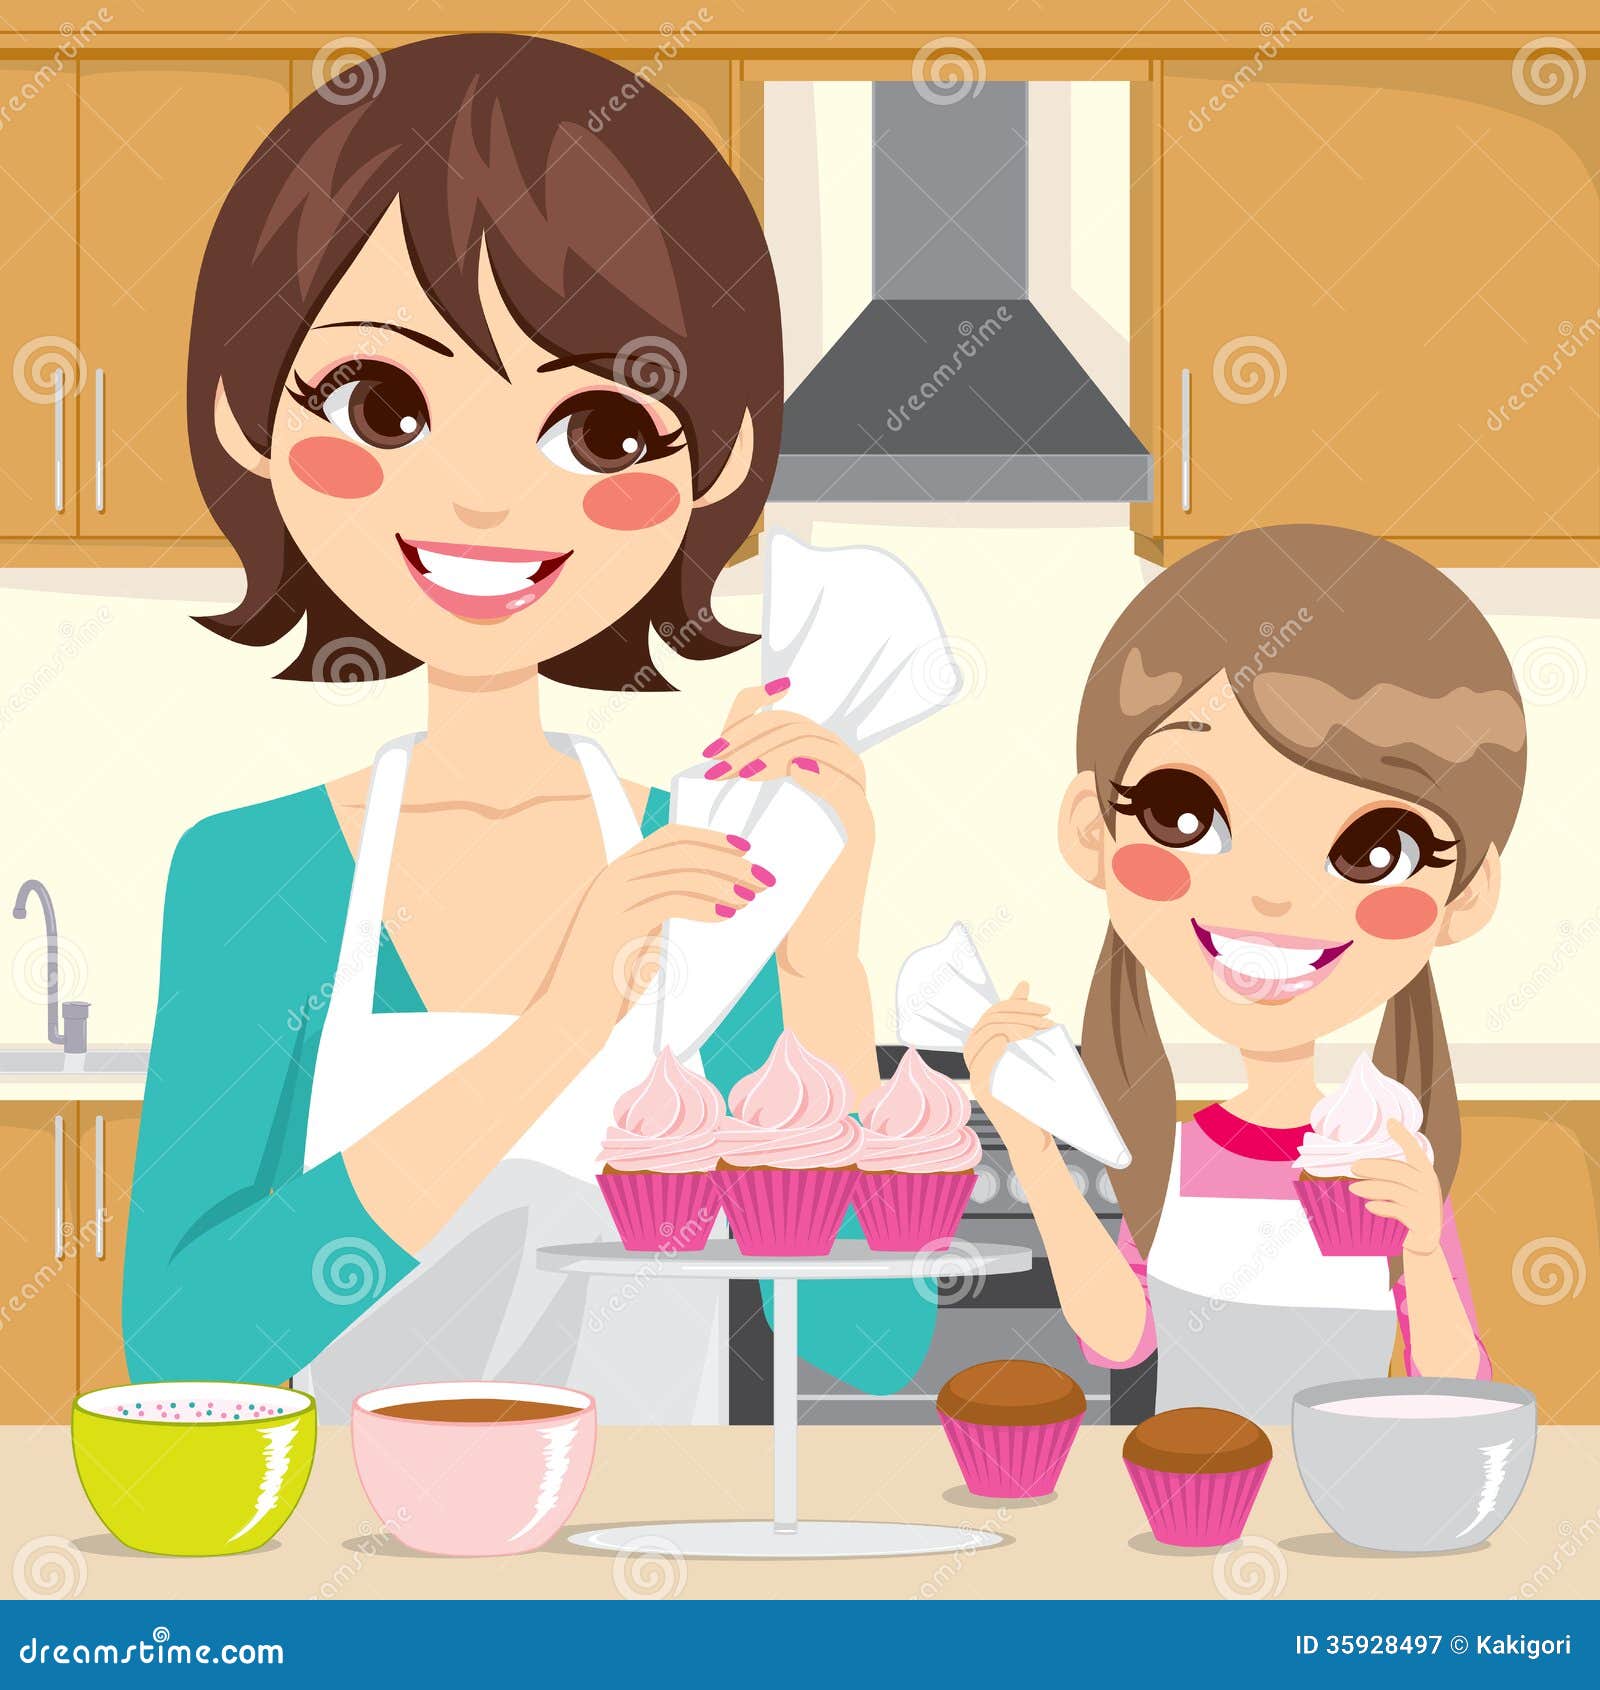 clipart of mother cooking - photo #26